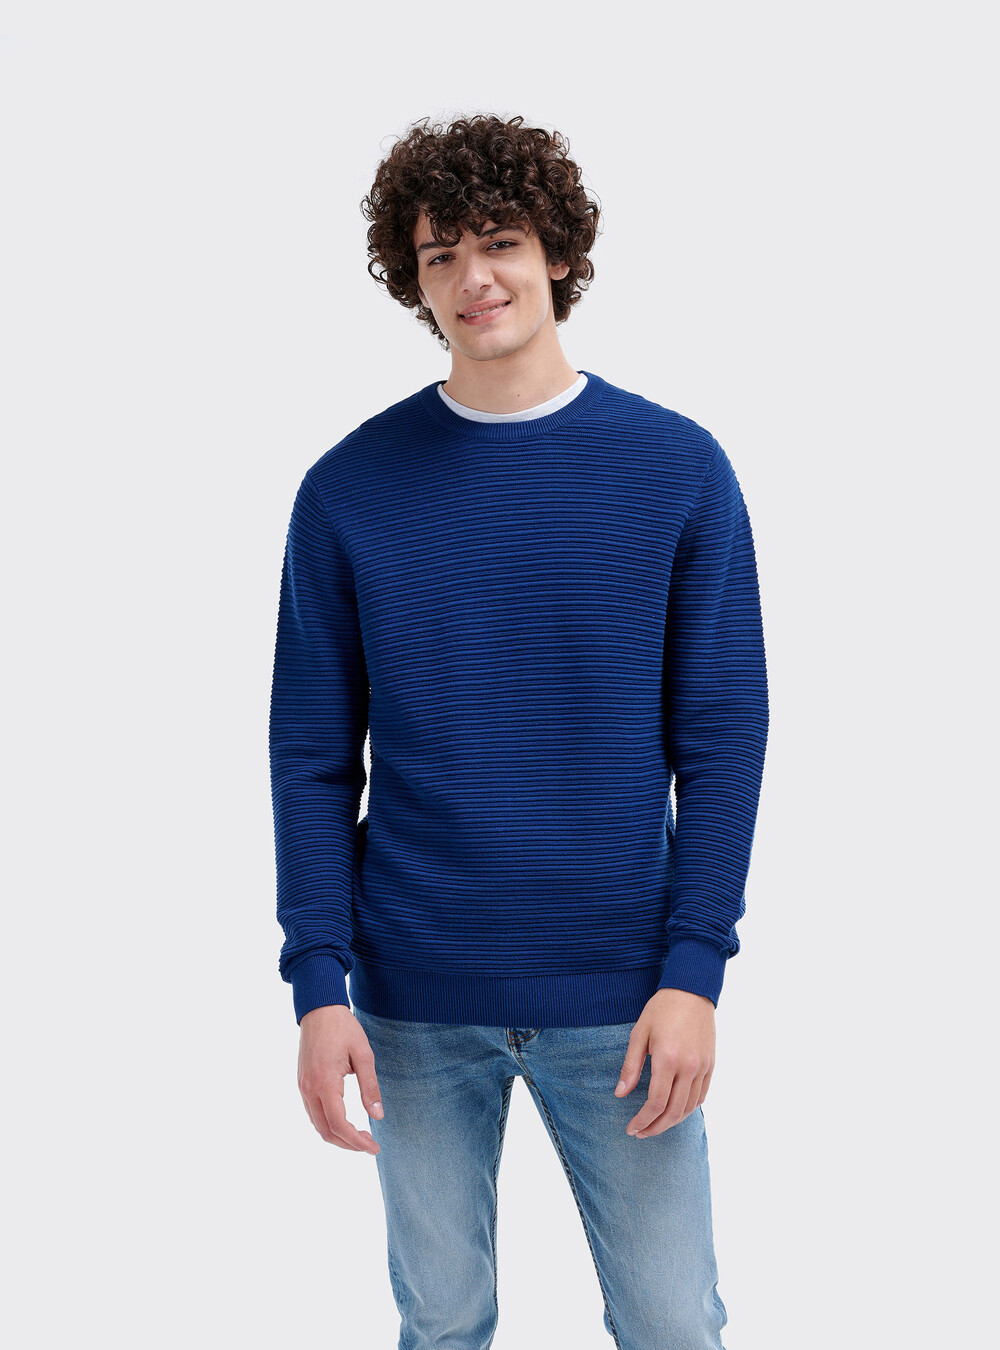 Basic crew neck structured knit sweater